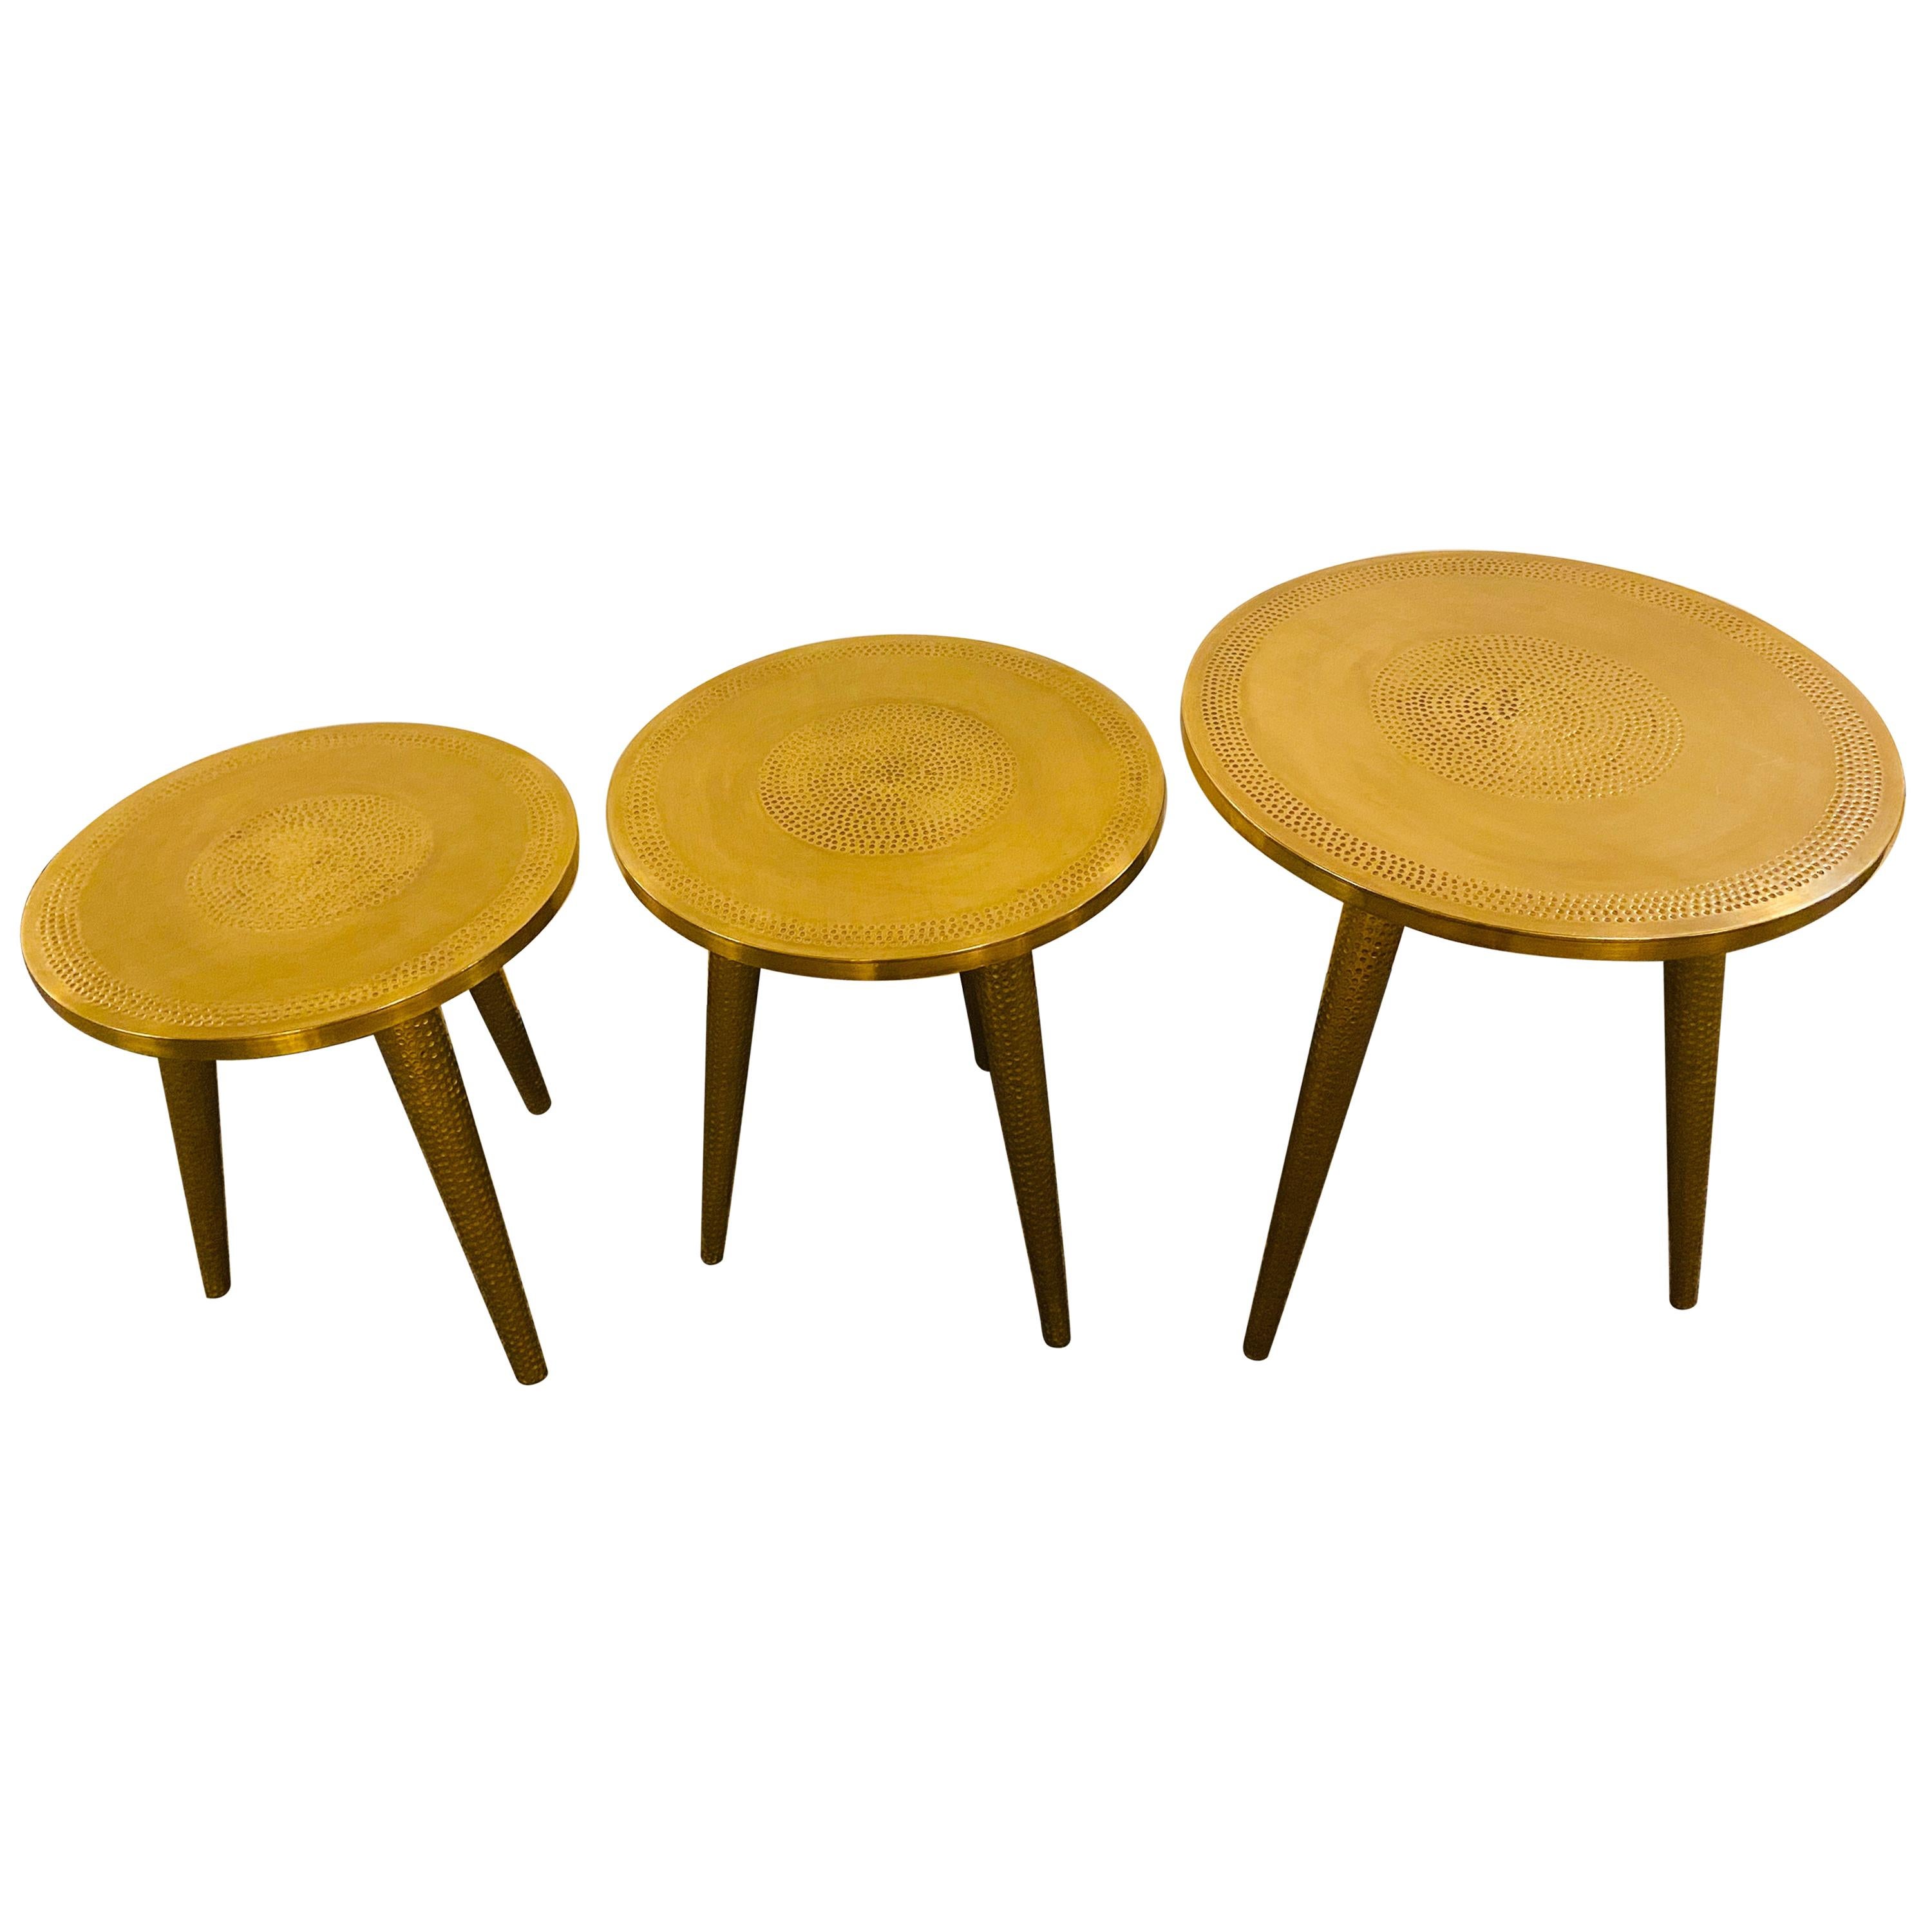 Mid-Century Modern Style Brass Nest of Tables or End Tables, Nest of Three